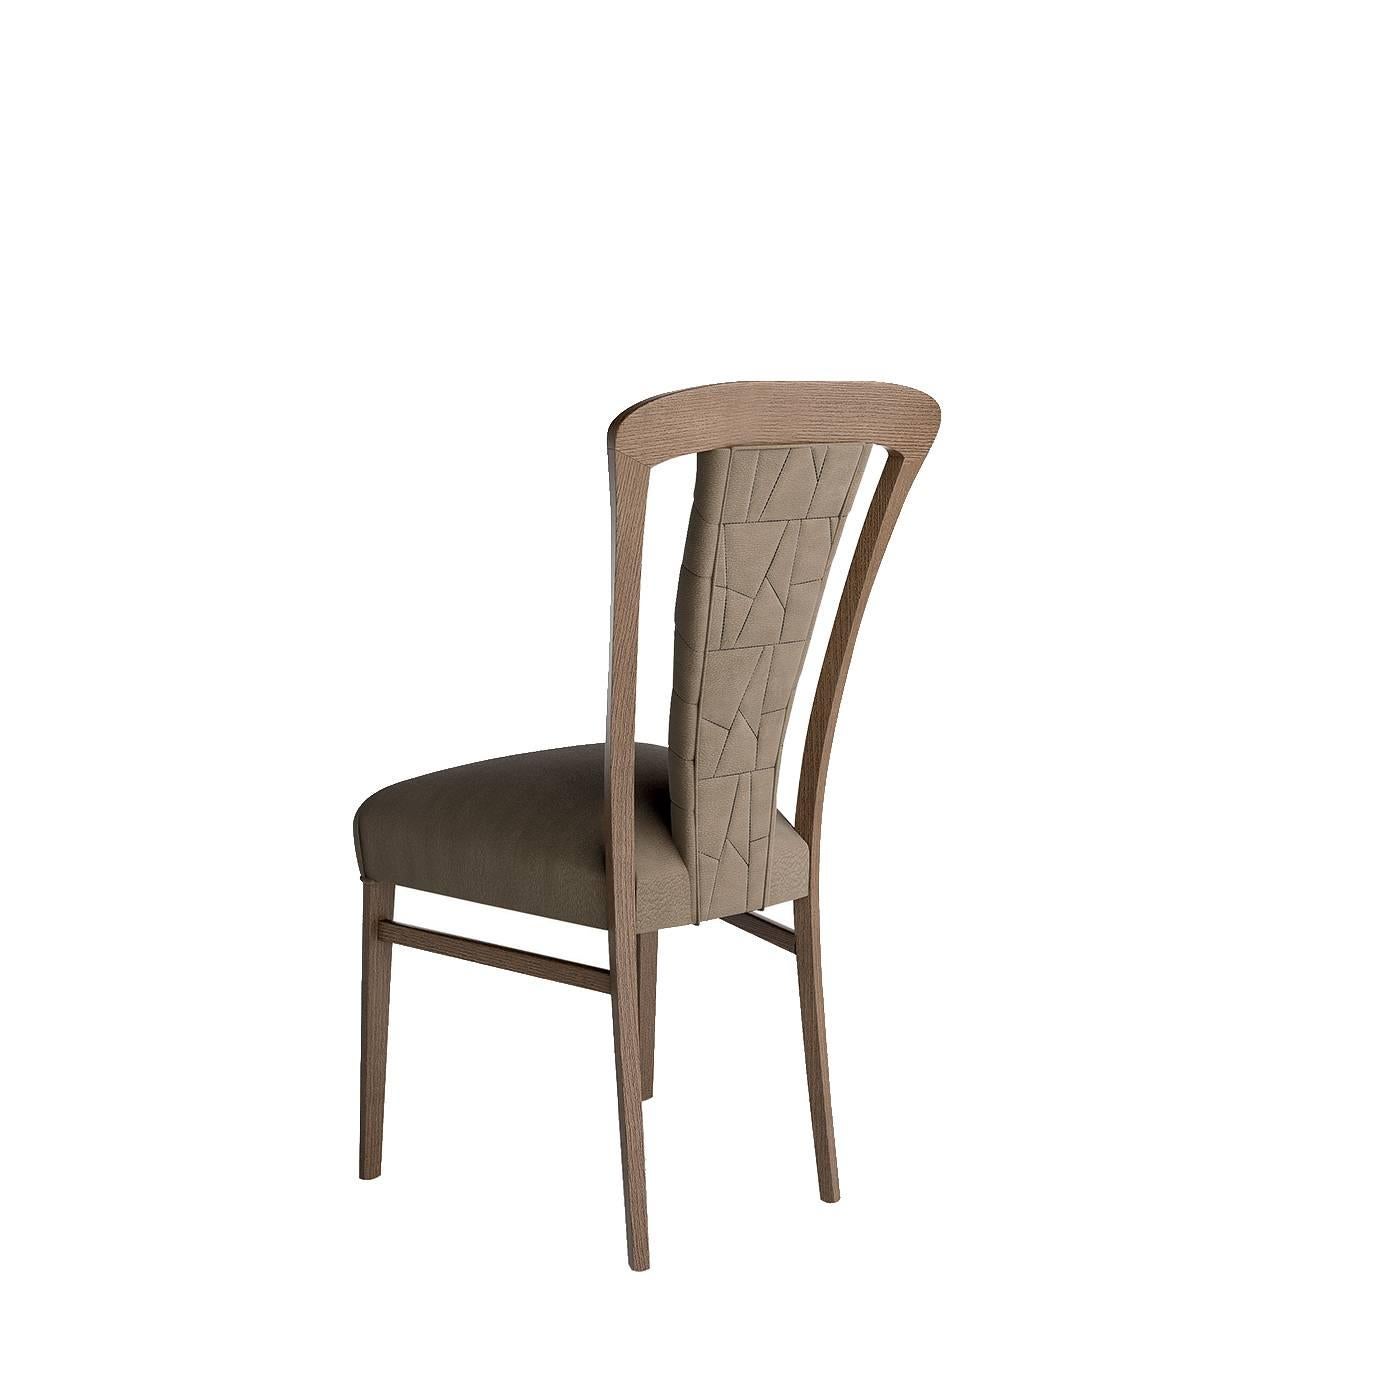 This cushioned chair will be a striking and comfortable addition to a dining room, to be combined with the tables from the Motivi collection, but also used as an accent chair in a living room or foyer. The wood structure is finished in a smoky,